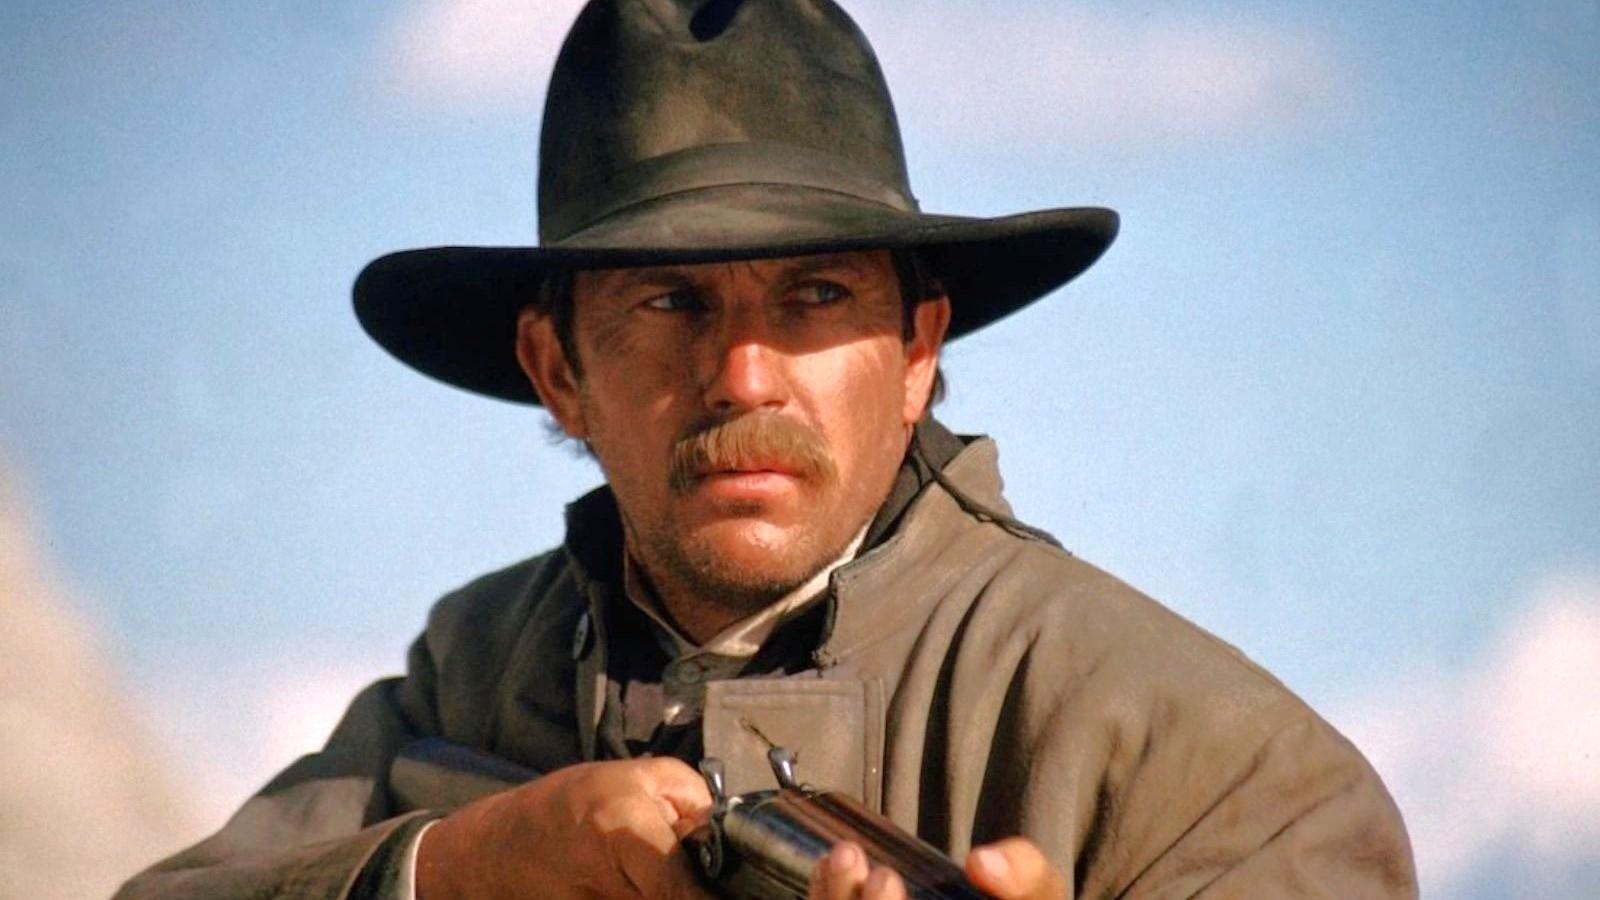 Kevin Costner wearing a cowboy hat and holding a gun